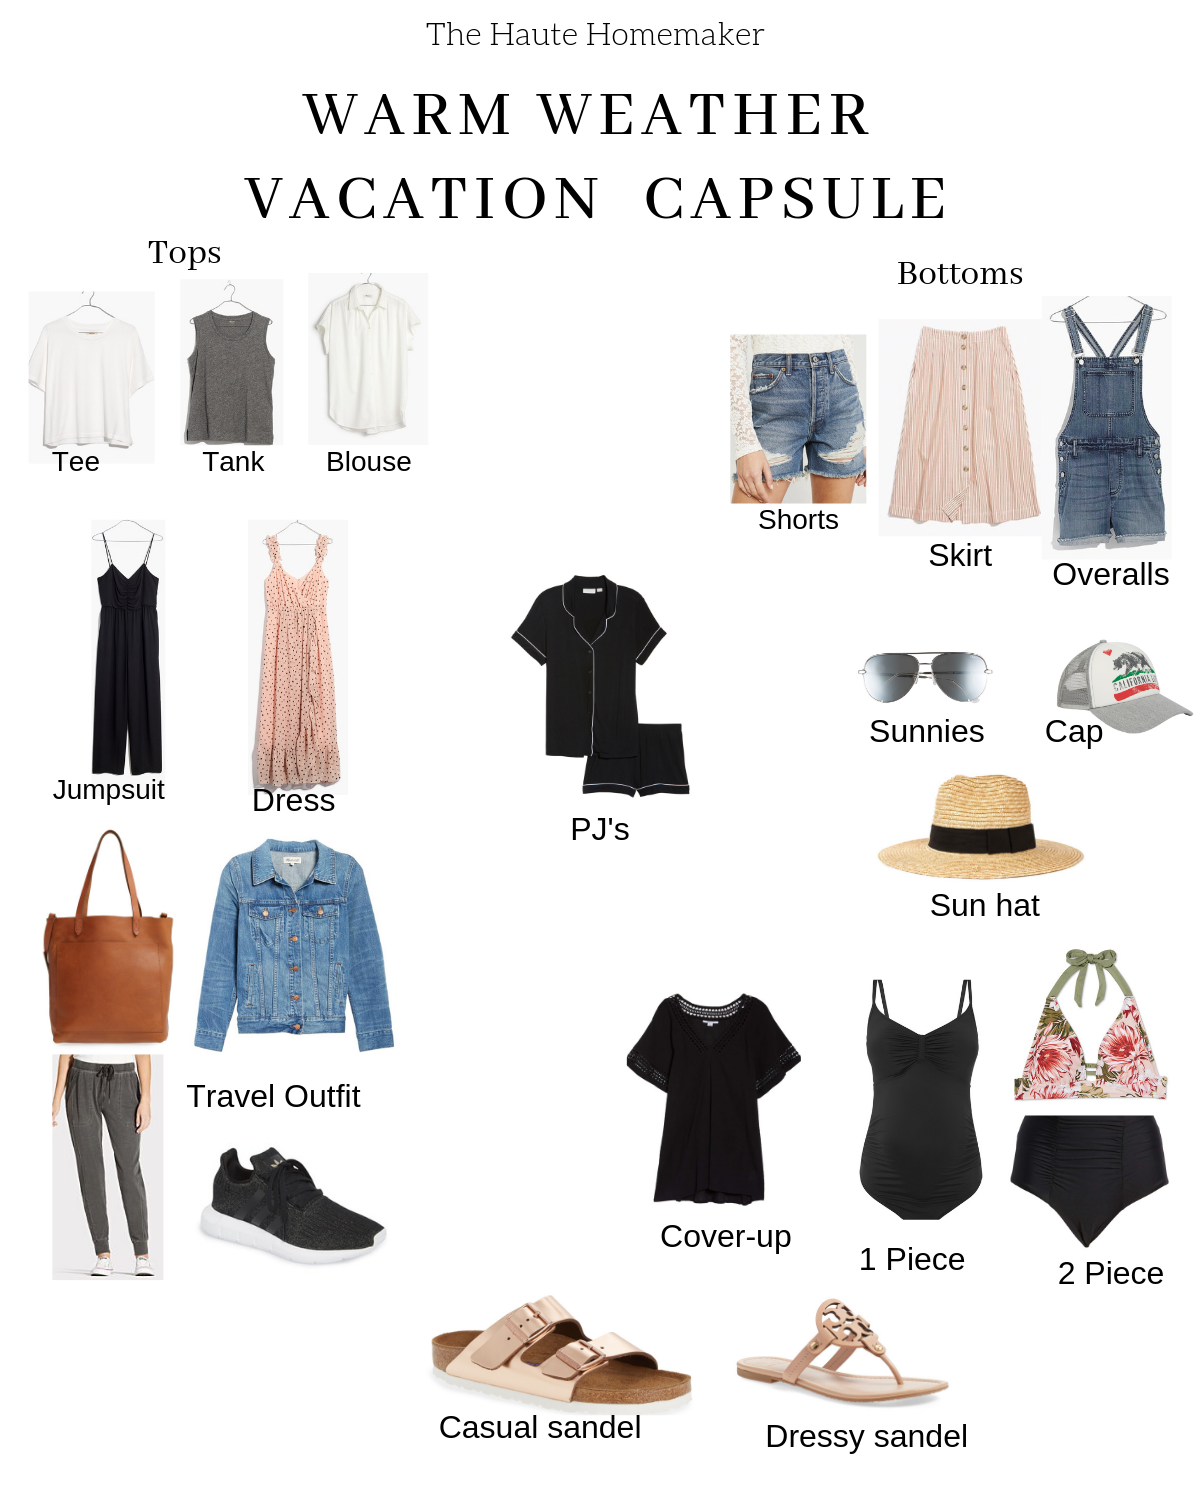 Pack: Warm Weather Vacation Capsule 